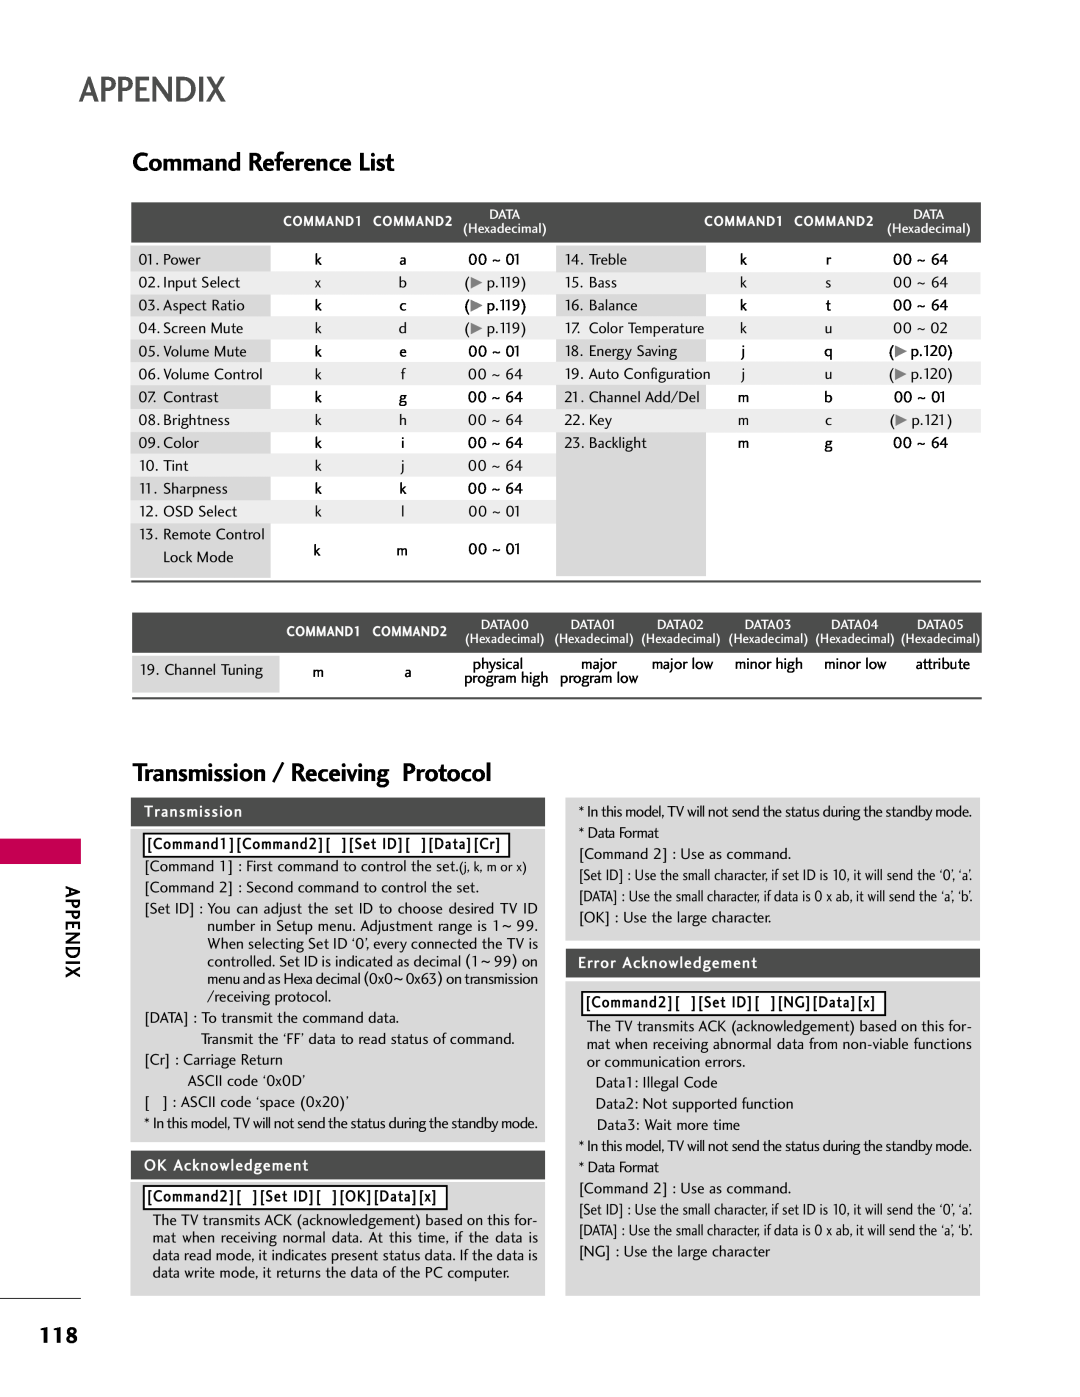 LG Electronics 32LH40 Command Reference List, Transmission / Receiving Protocol, Appendix, physical, major, attribute 